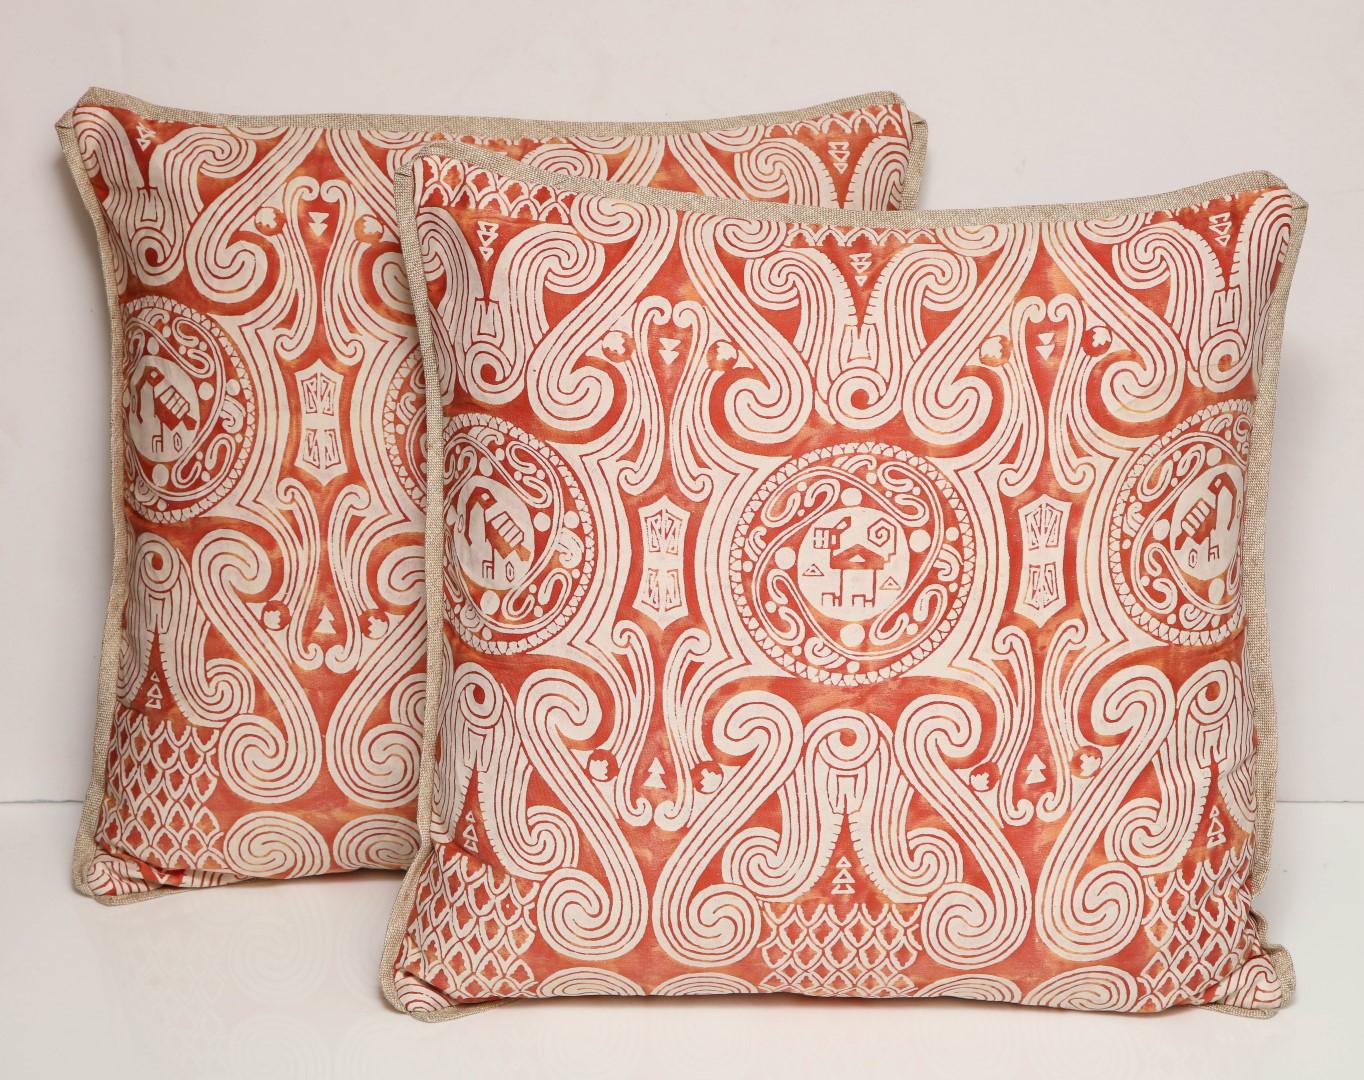 A pair of Fortuny fabric cushions in the Peruviano Incan pattern, bittersweet and white colorway, cotton blend backing material and trim
50 down/50 feather insert.
Newly made using discontinued Fortuny fabric.